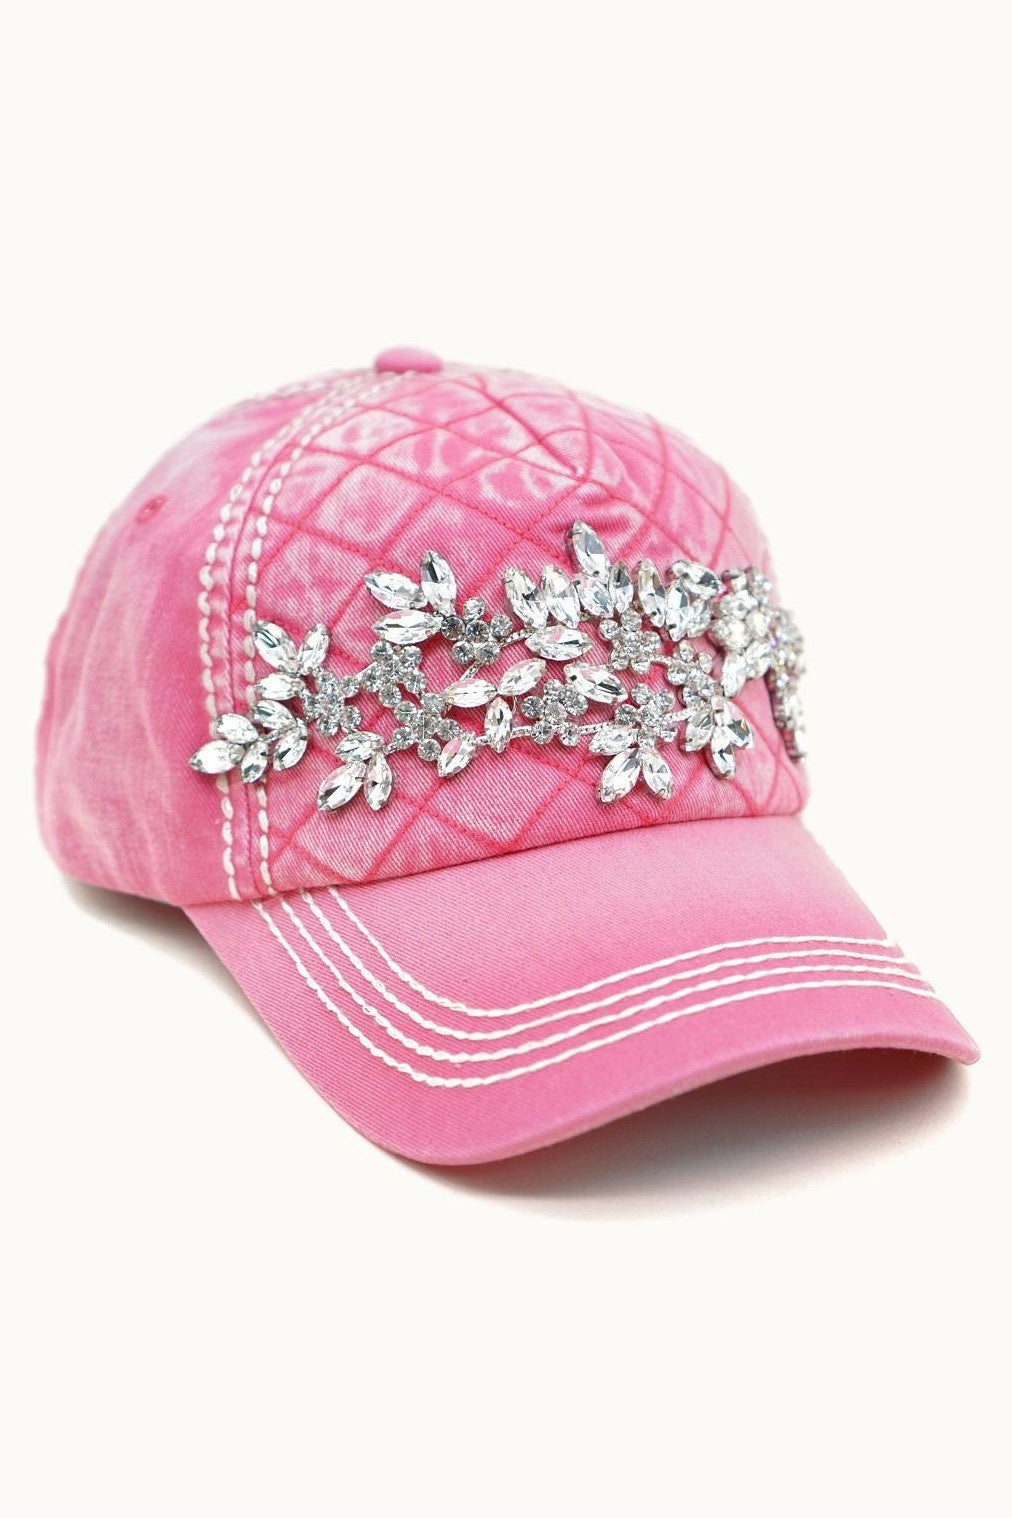 Pink or black quilted rhinestone floral detail hat by Olive & Pique